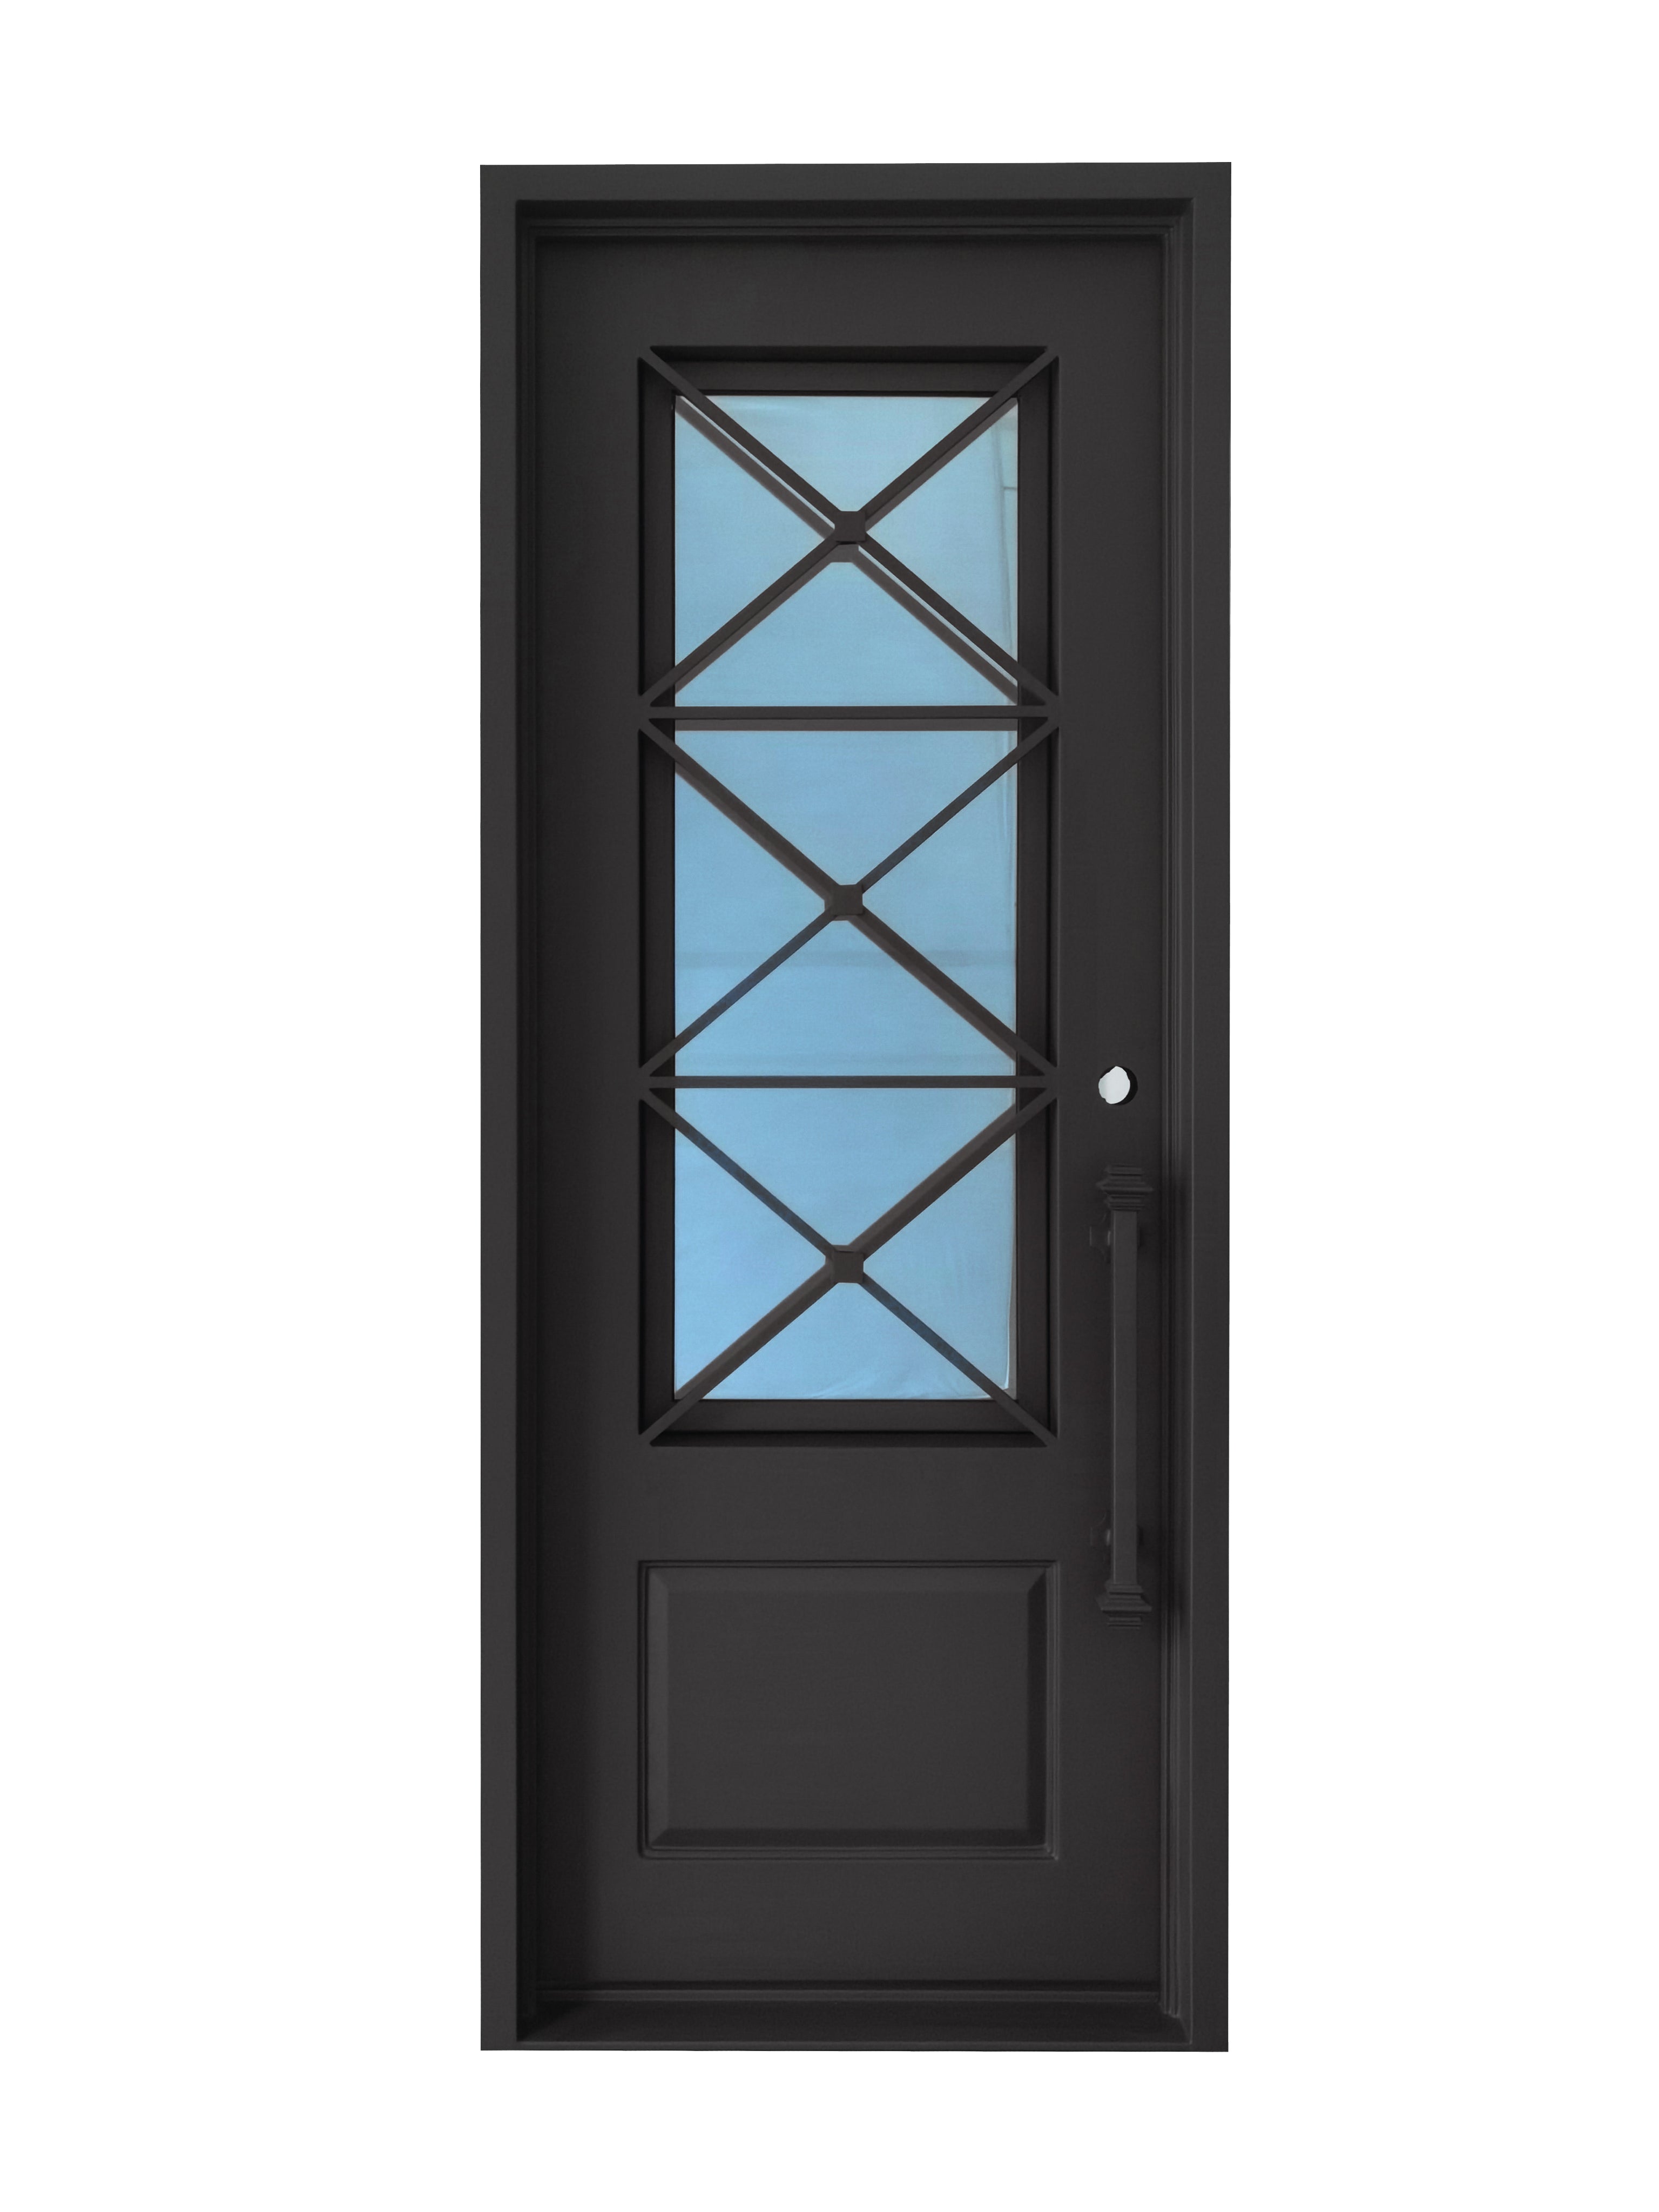 Rockport Model Pre Hung Single Front Entry Wrought Iron Door With Reflective Glass Matt Black Finish